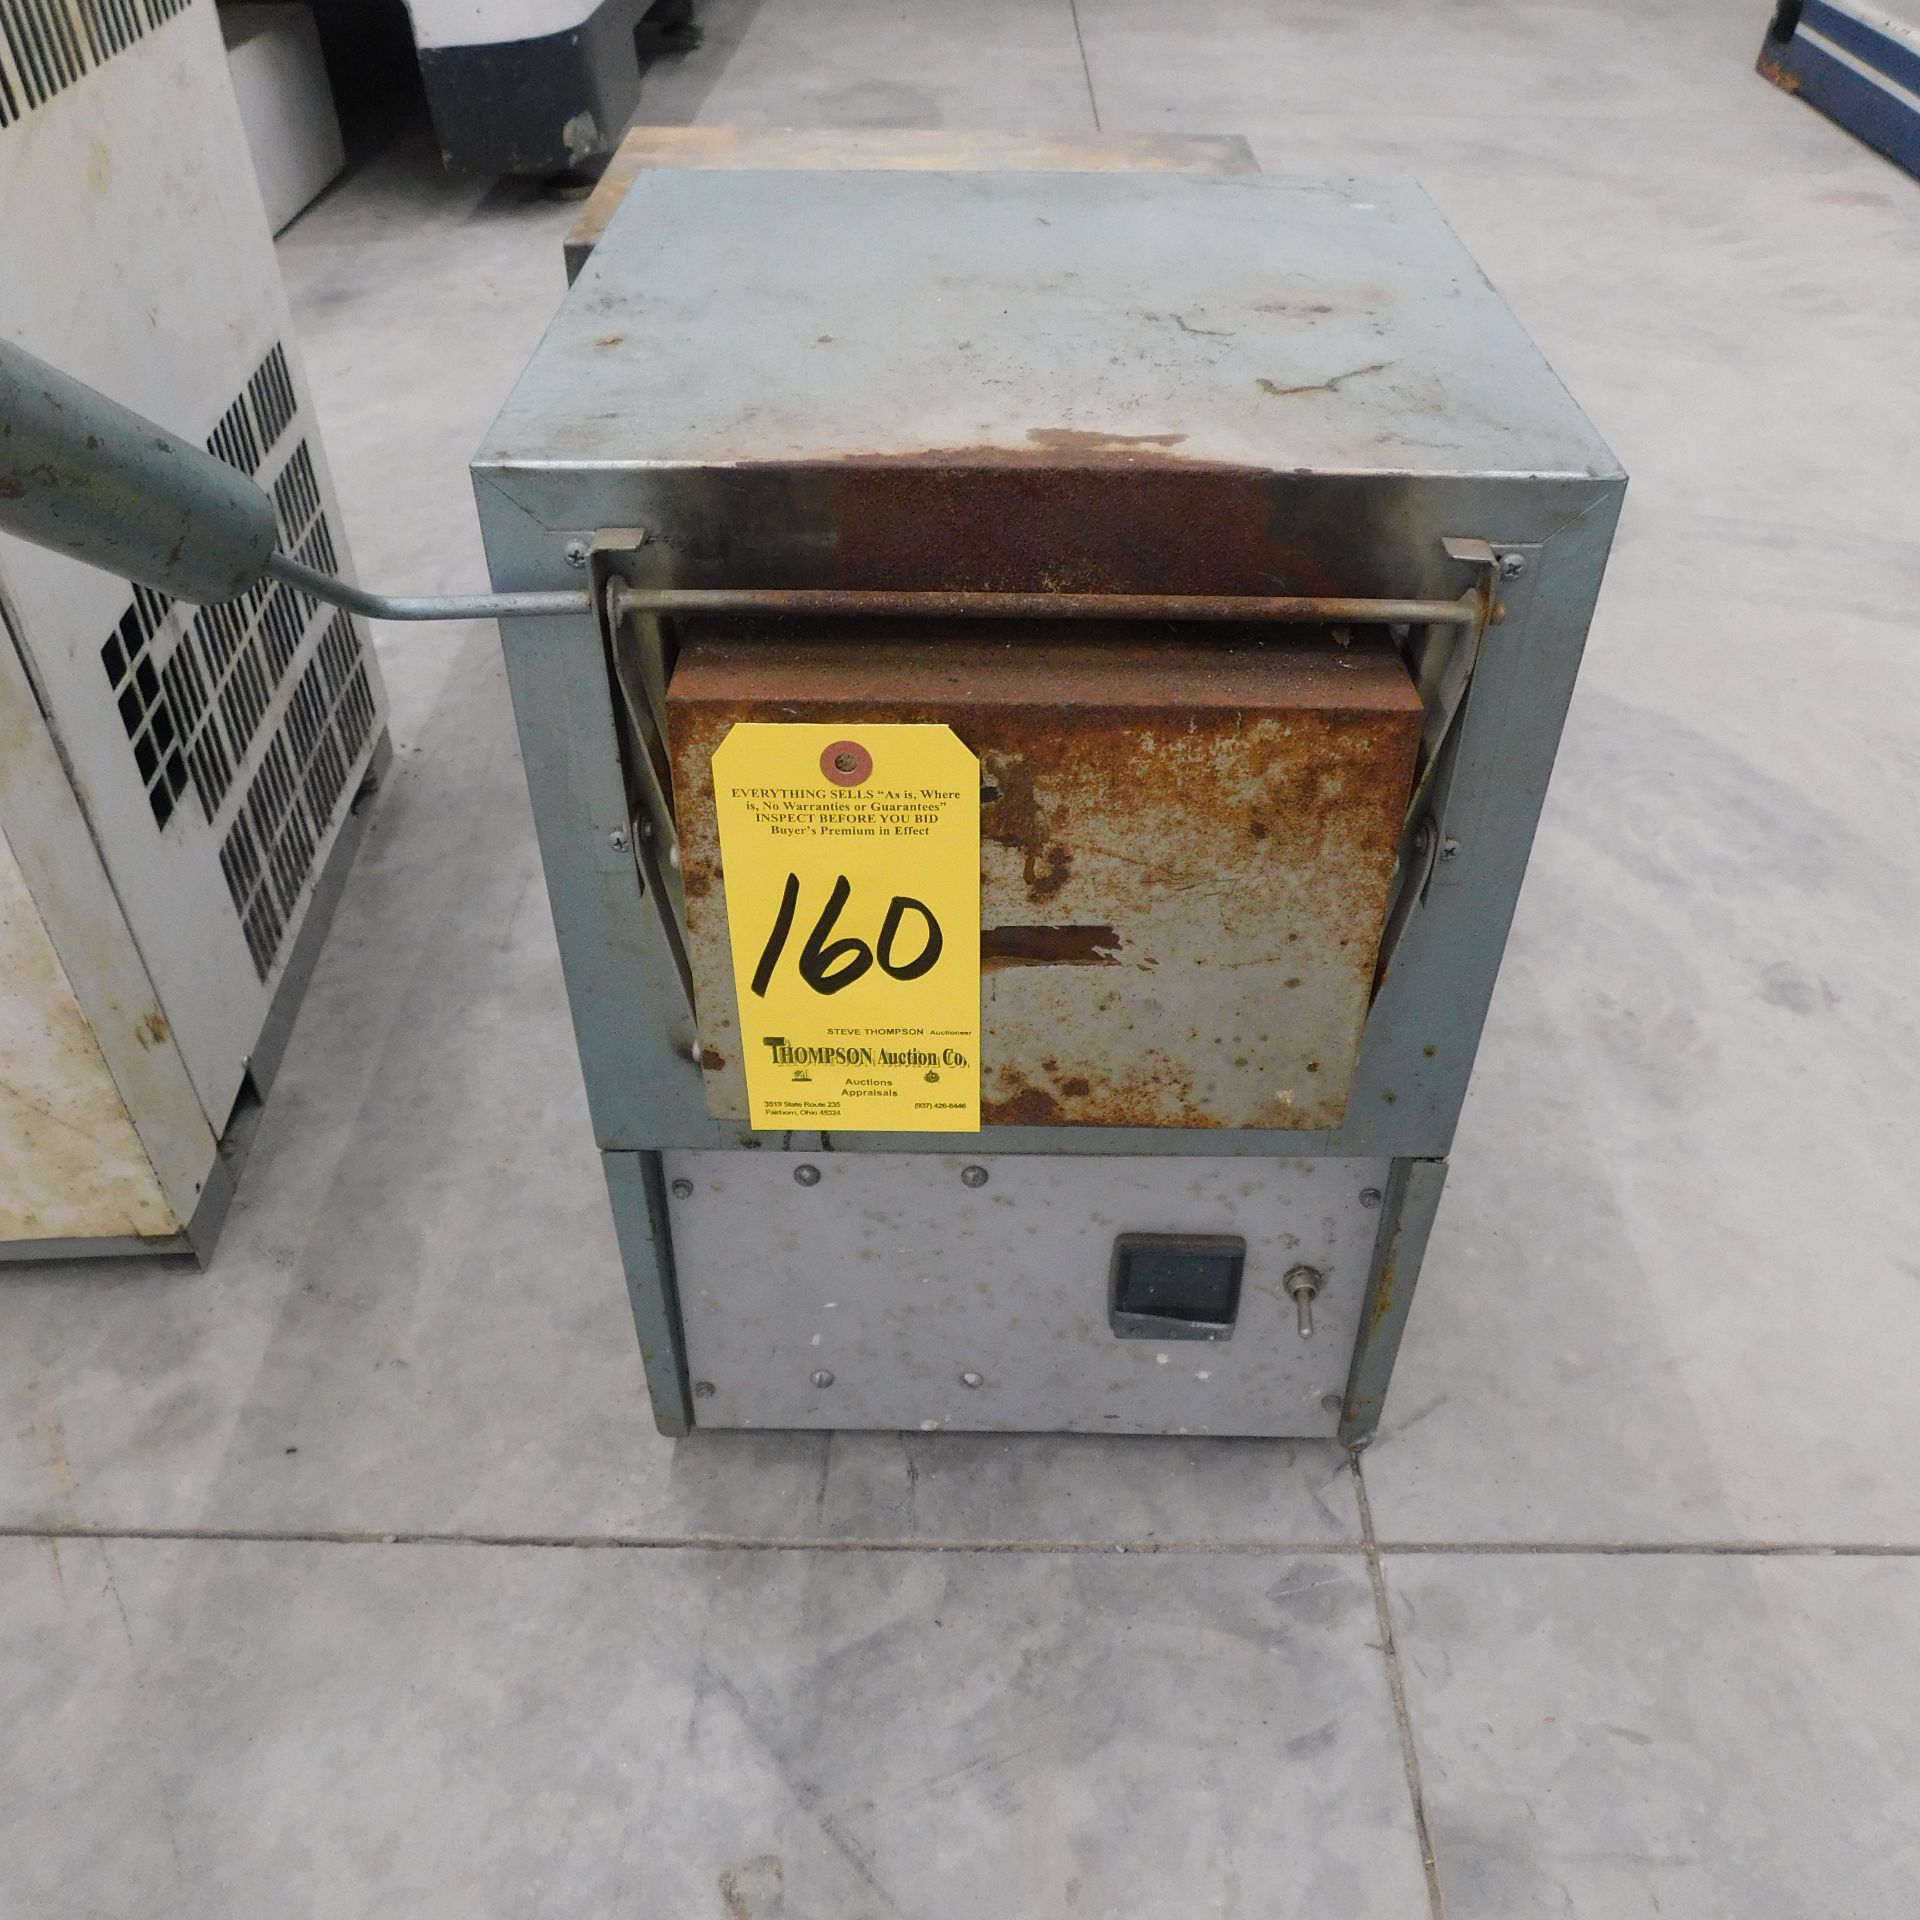 Bench Top Electric Furnace, Mfg. Unknown, Est. 2,000 Degree, 110/1/60